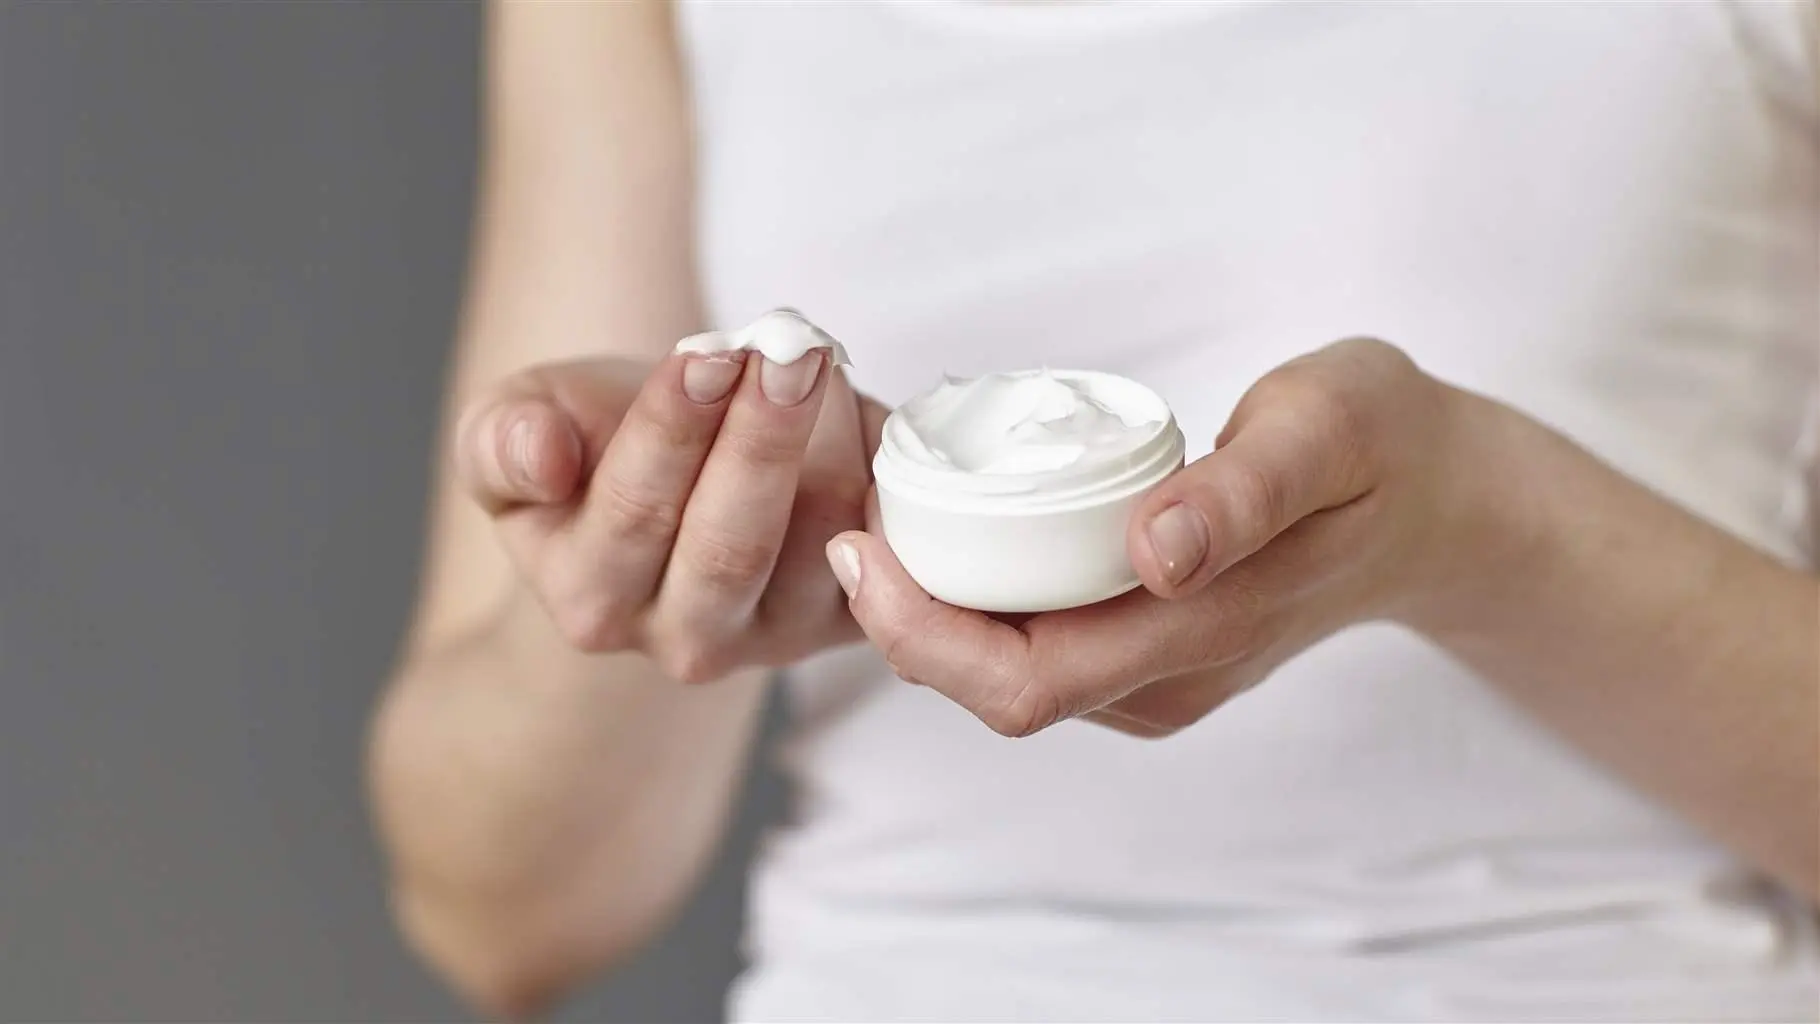 Woman rubbing compounded cream on her hand